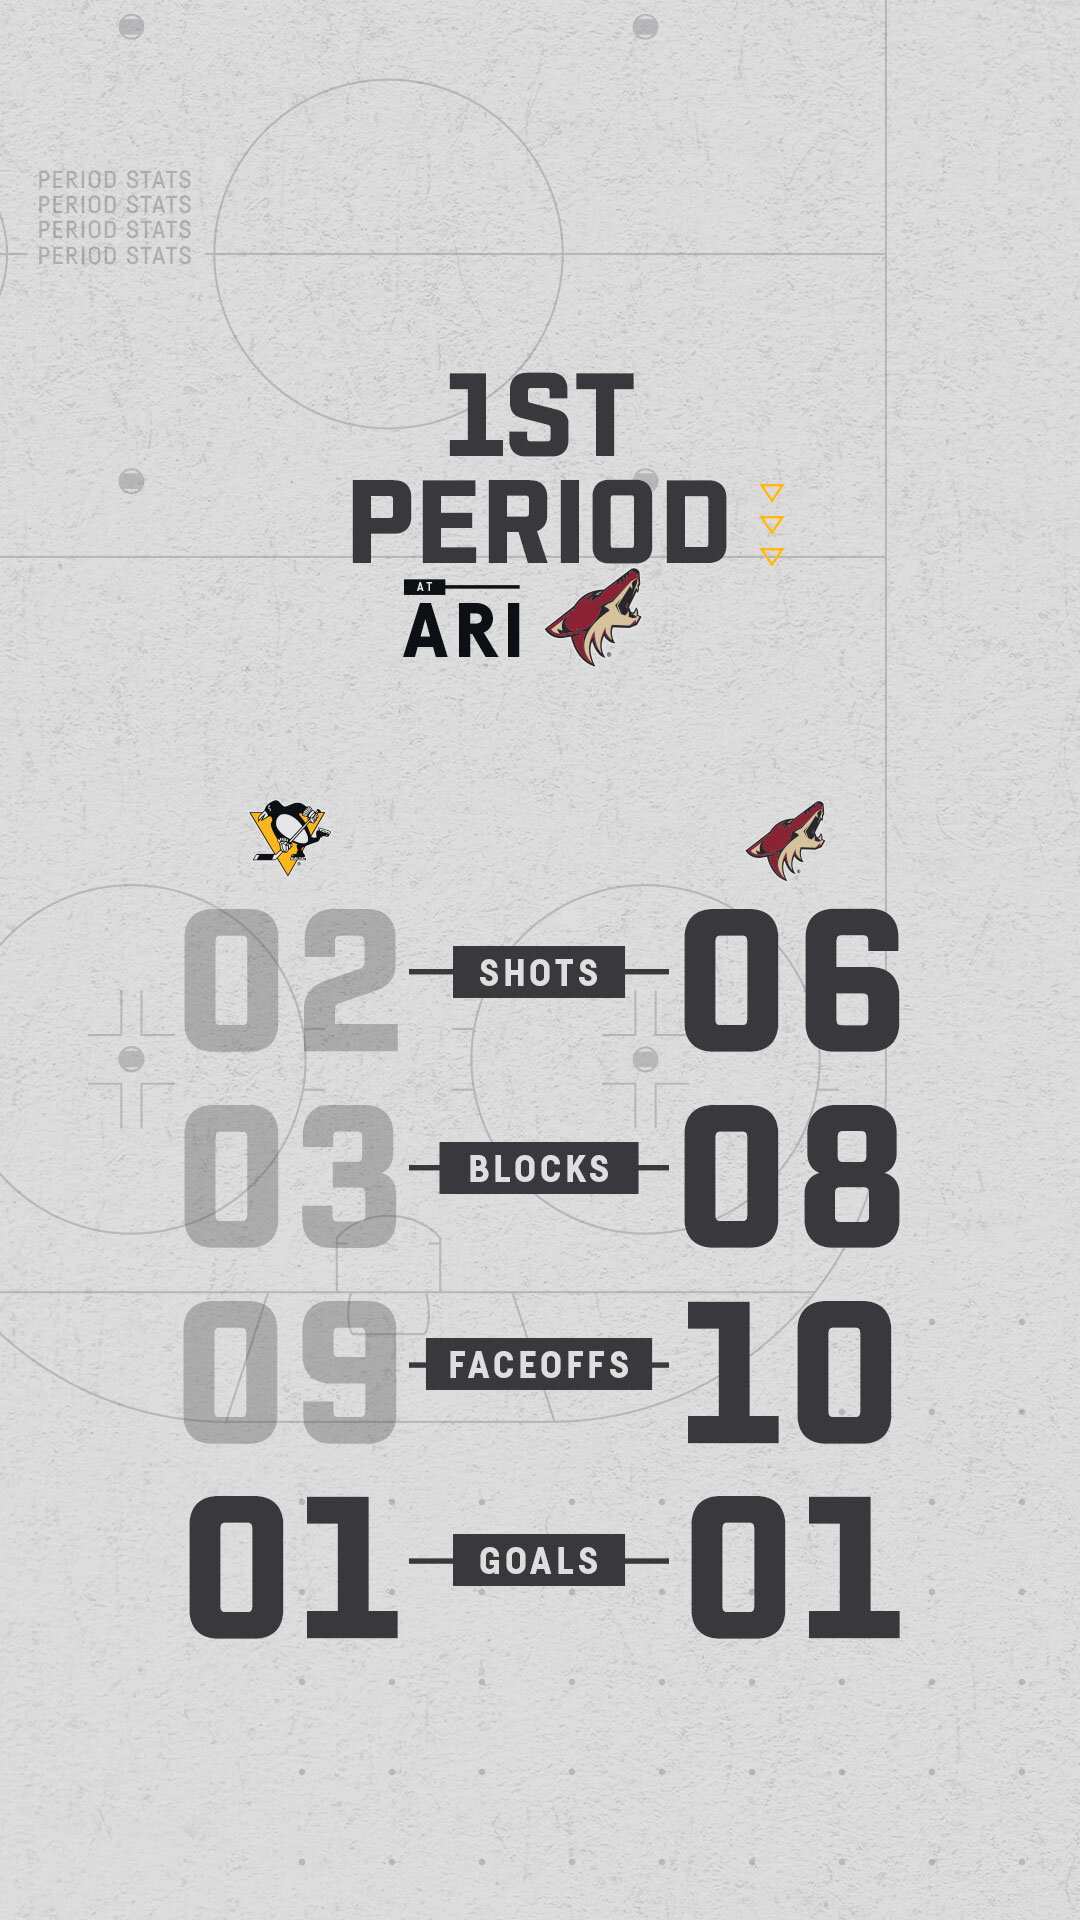 1st Period Stats Graphic